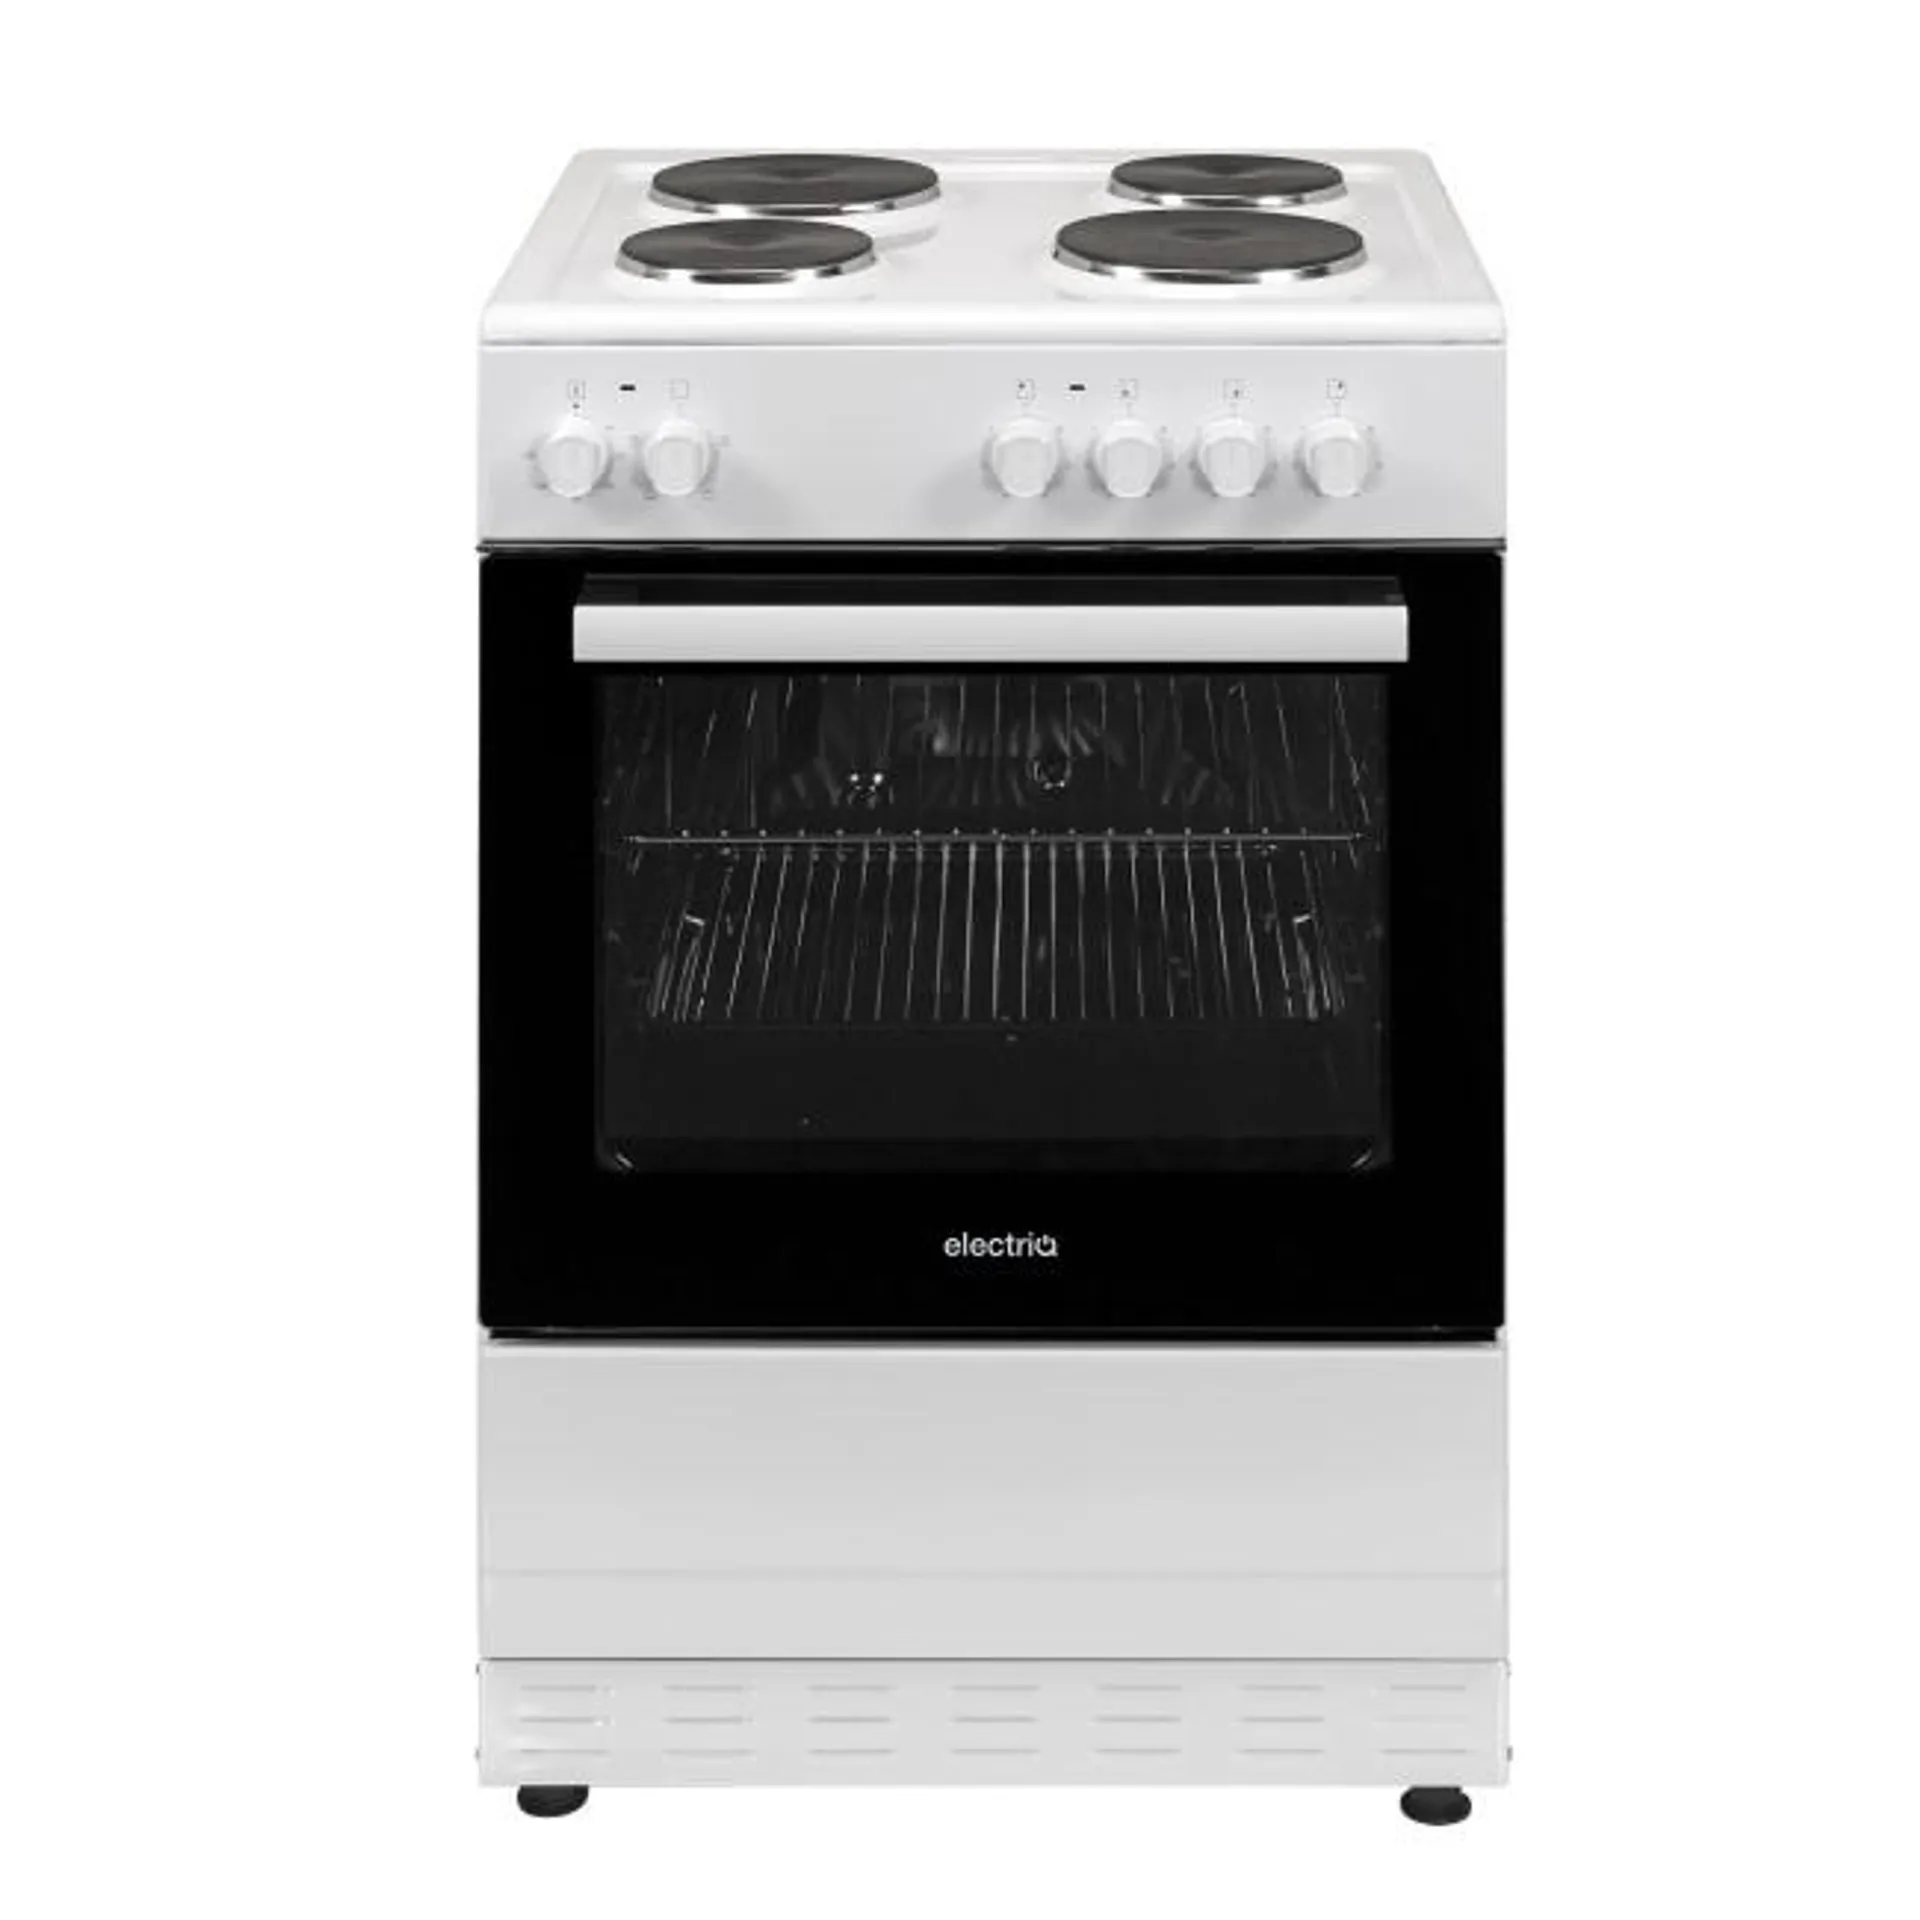 electriQ 60cm Single Oven Electric Cooker with Sealed Plate Hob - White